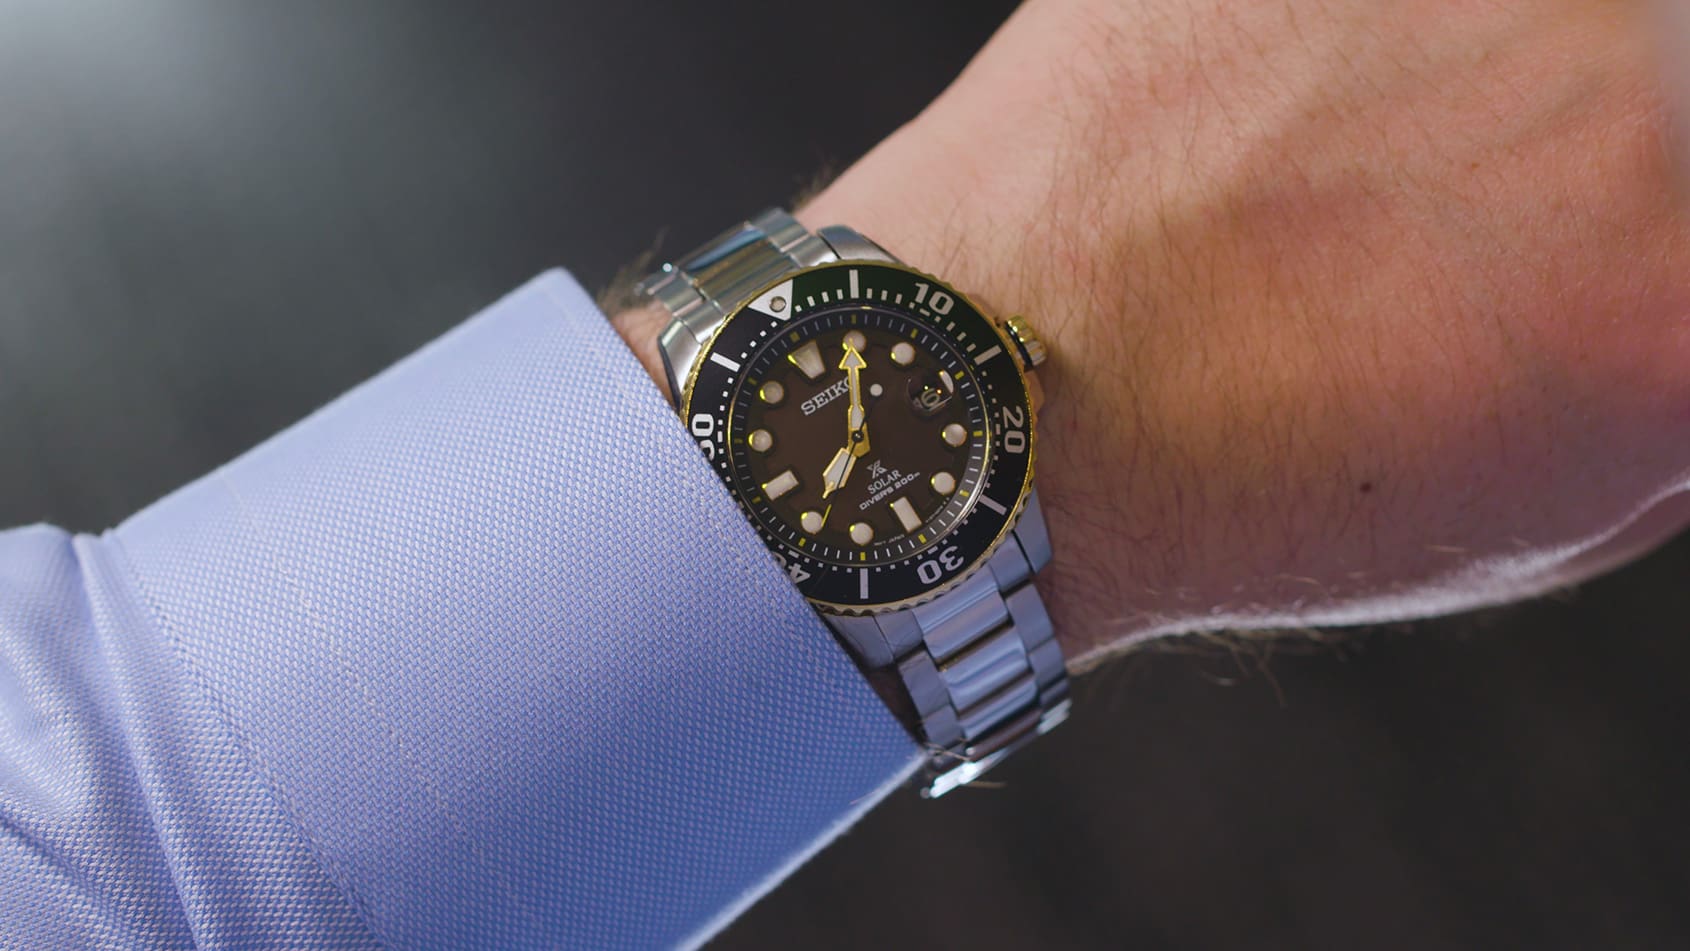 VIDEO: Seiko’s Australia-only limited edition, and how to get your hands on one (for a good cause)